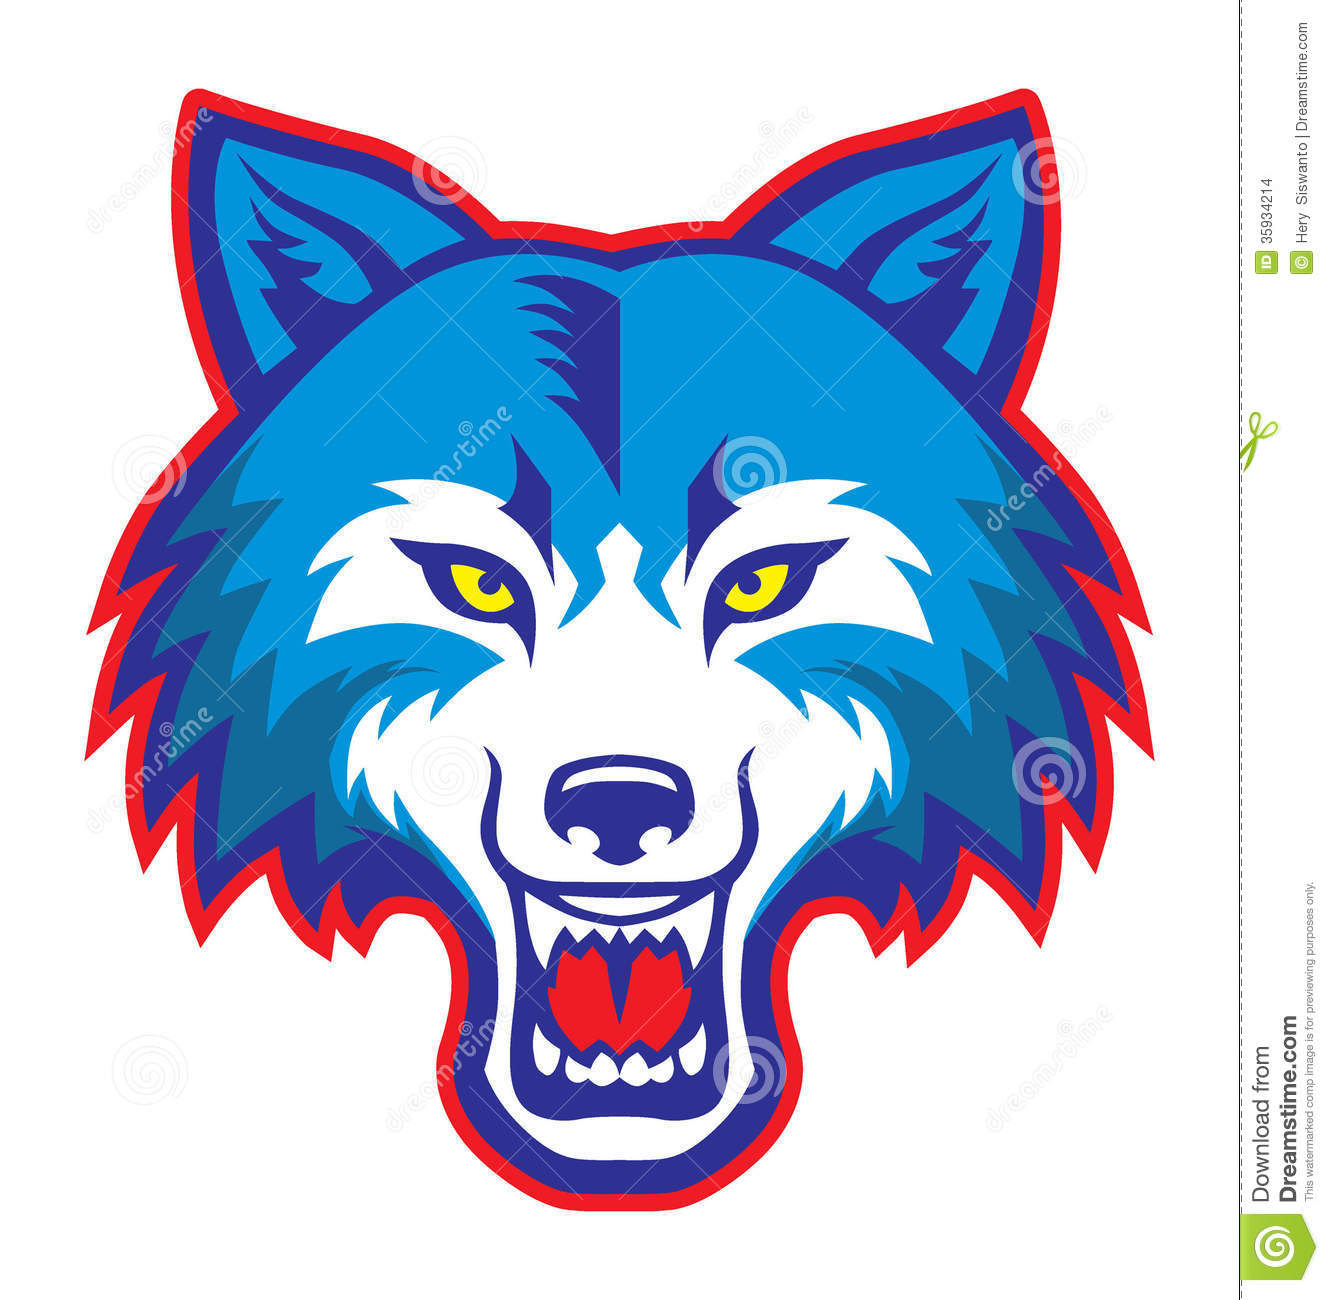 Angry Wolf Head Mascot Stock Images   Image  35934214